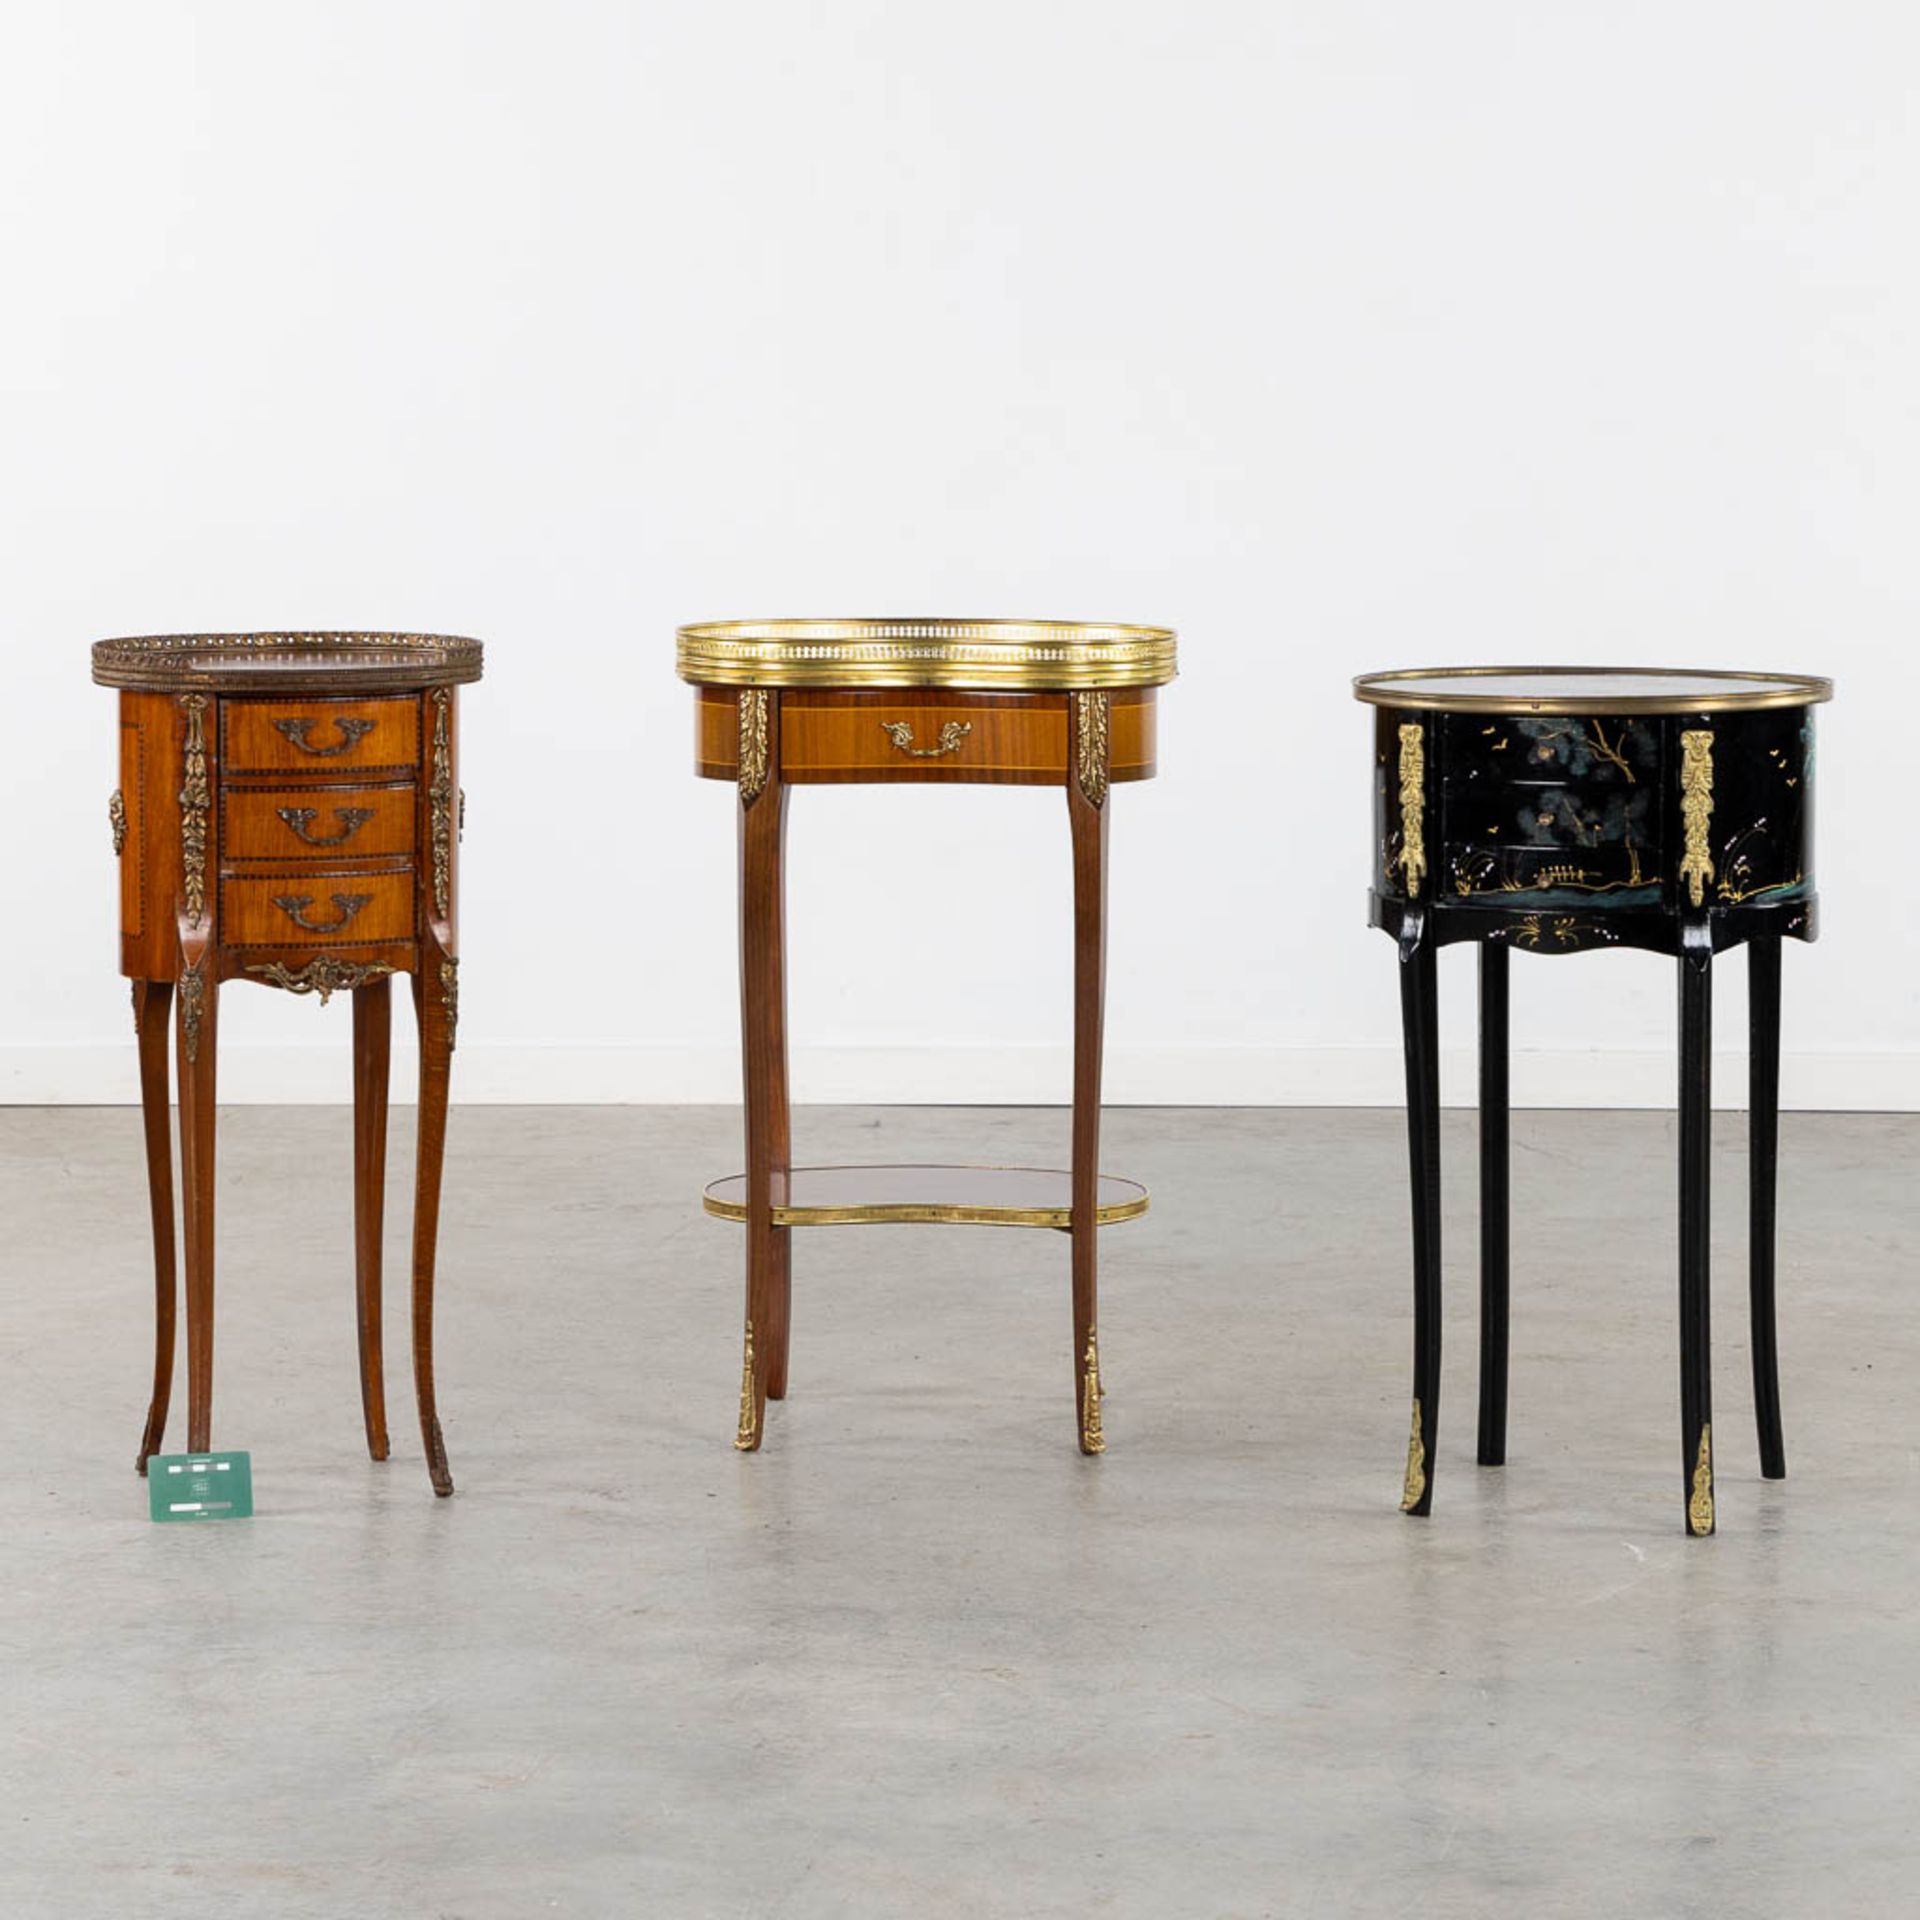 Three small side tables, marquetry and painted decor. 20th C. (L:30 x W:44 x H:71 cm) - Image 2 of 14